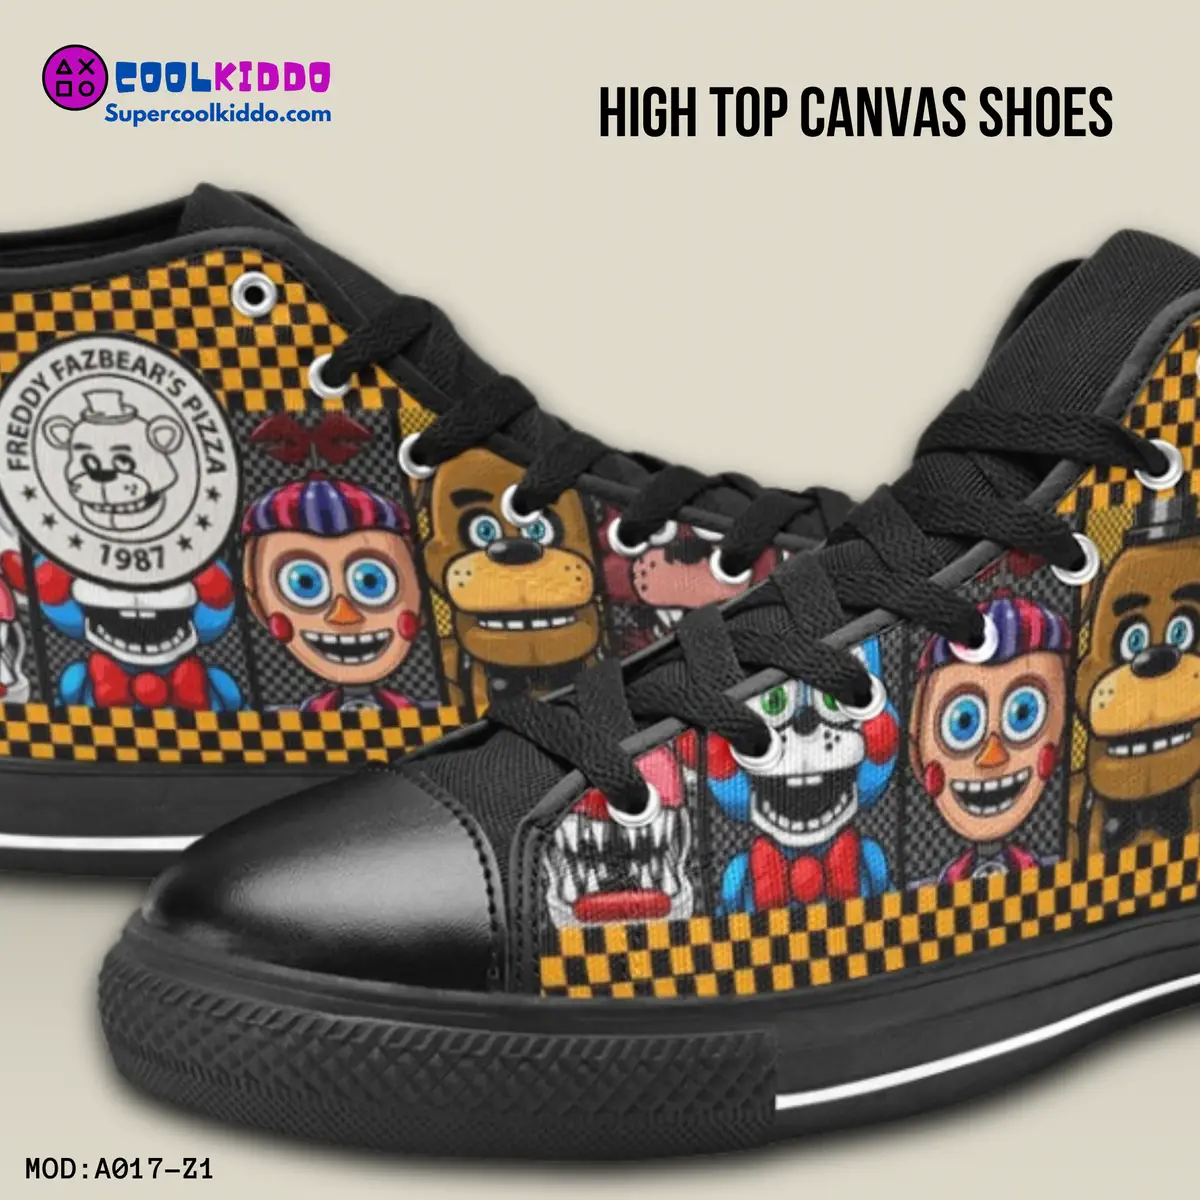 Five Nights at Freddy’s Movie Inspired High Top Shoes for Kids – Horror Characters Cool Kiddo 10